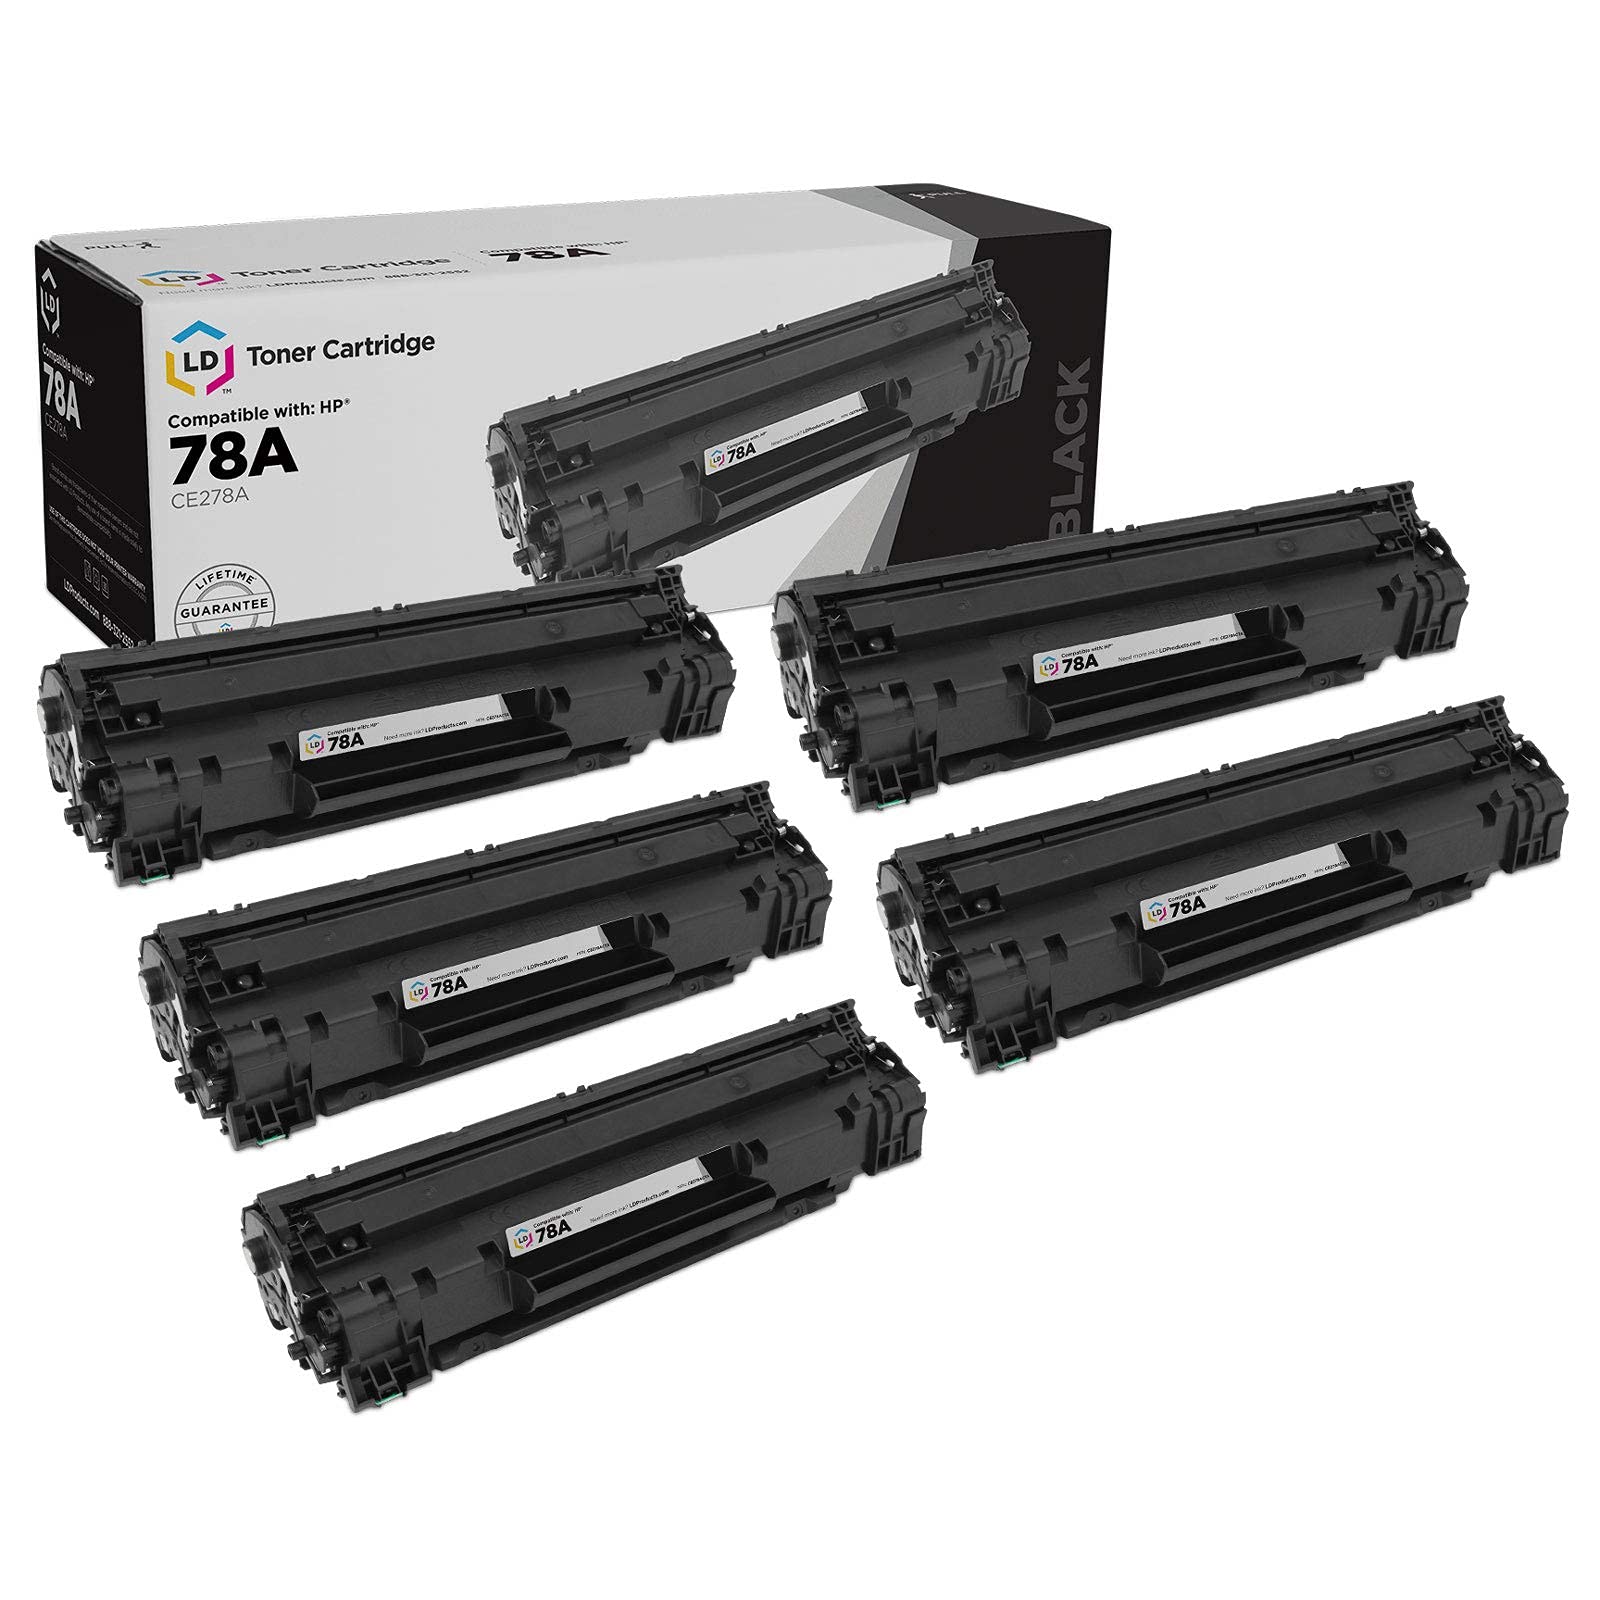 LD Compatible Toner Cartridge Replacements for HP 78A CE278A (Black, 5-Pack)